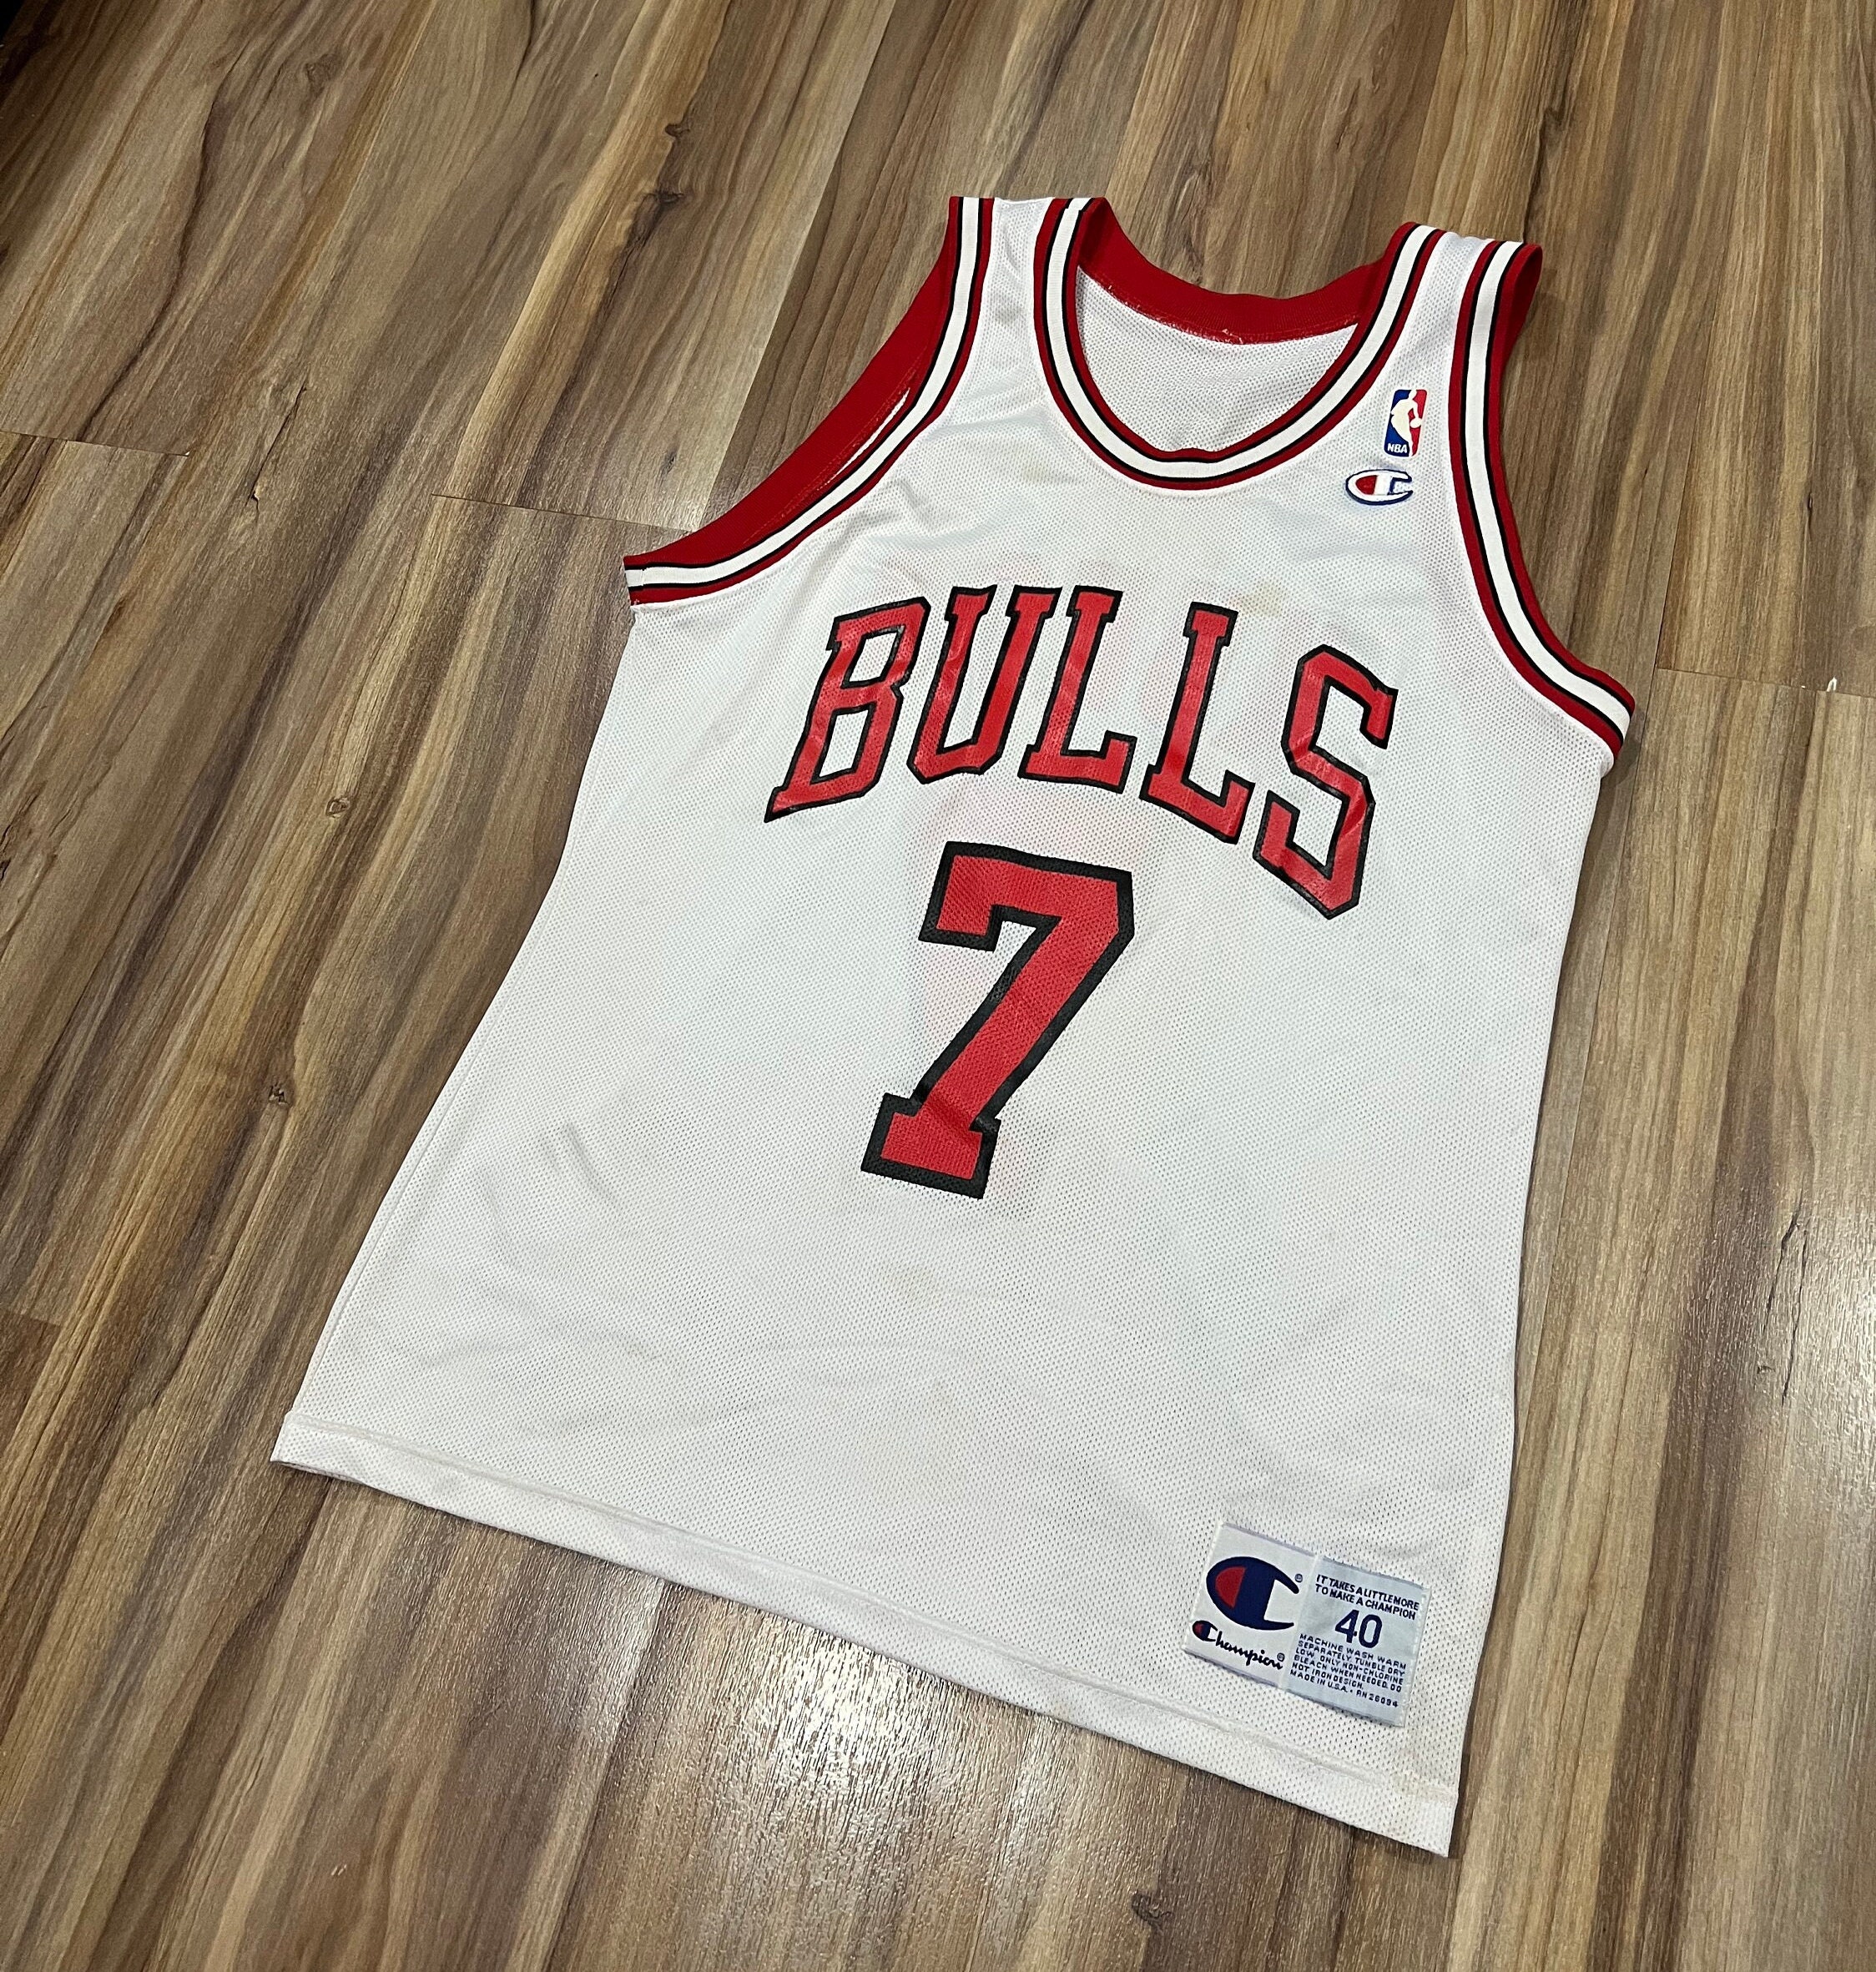 Dennis Rodman Signed Chicago Bulls Jersey - Beckett Authentication Services  BAS COA Authenticated - Professionally Framed & 2 8x10 Photo 34x42